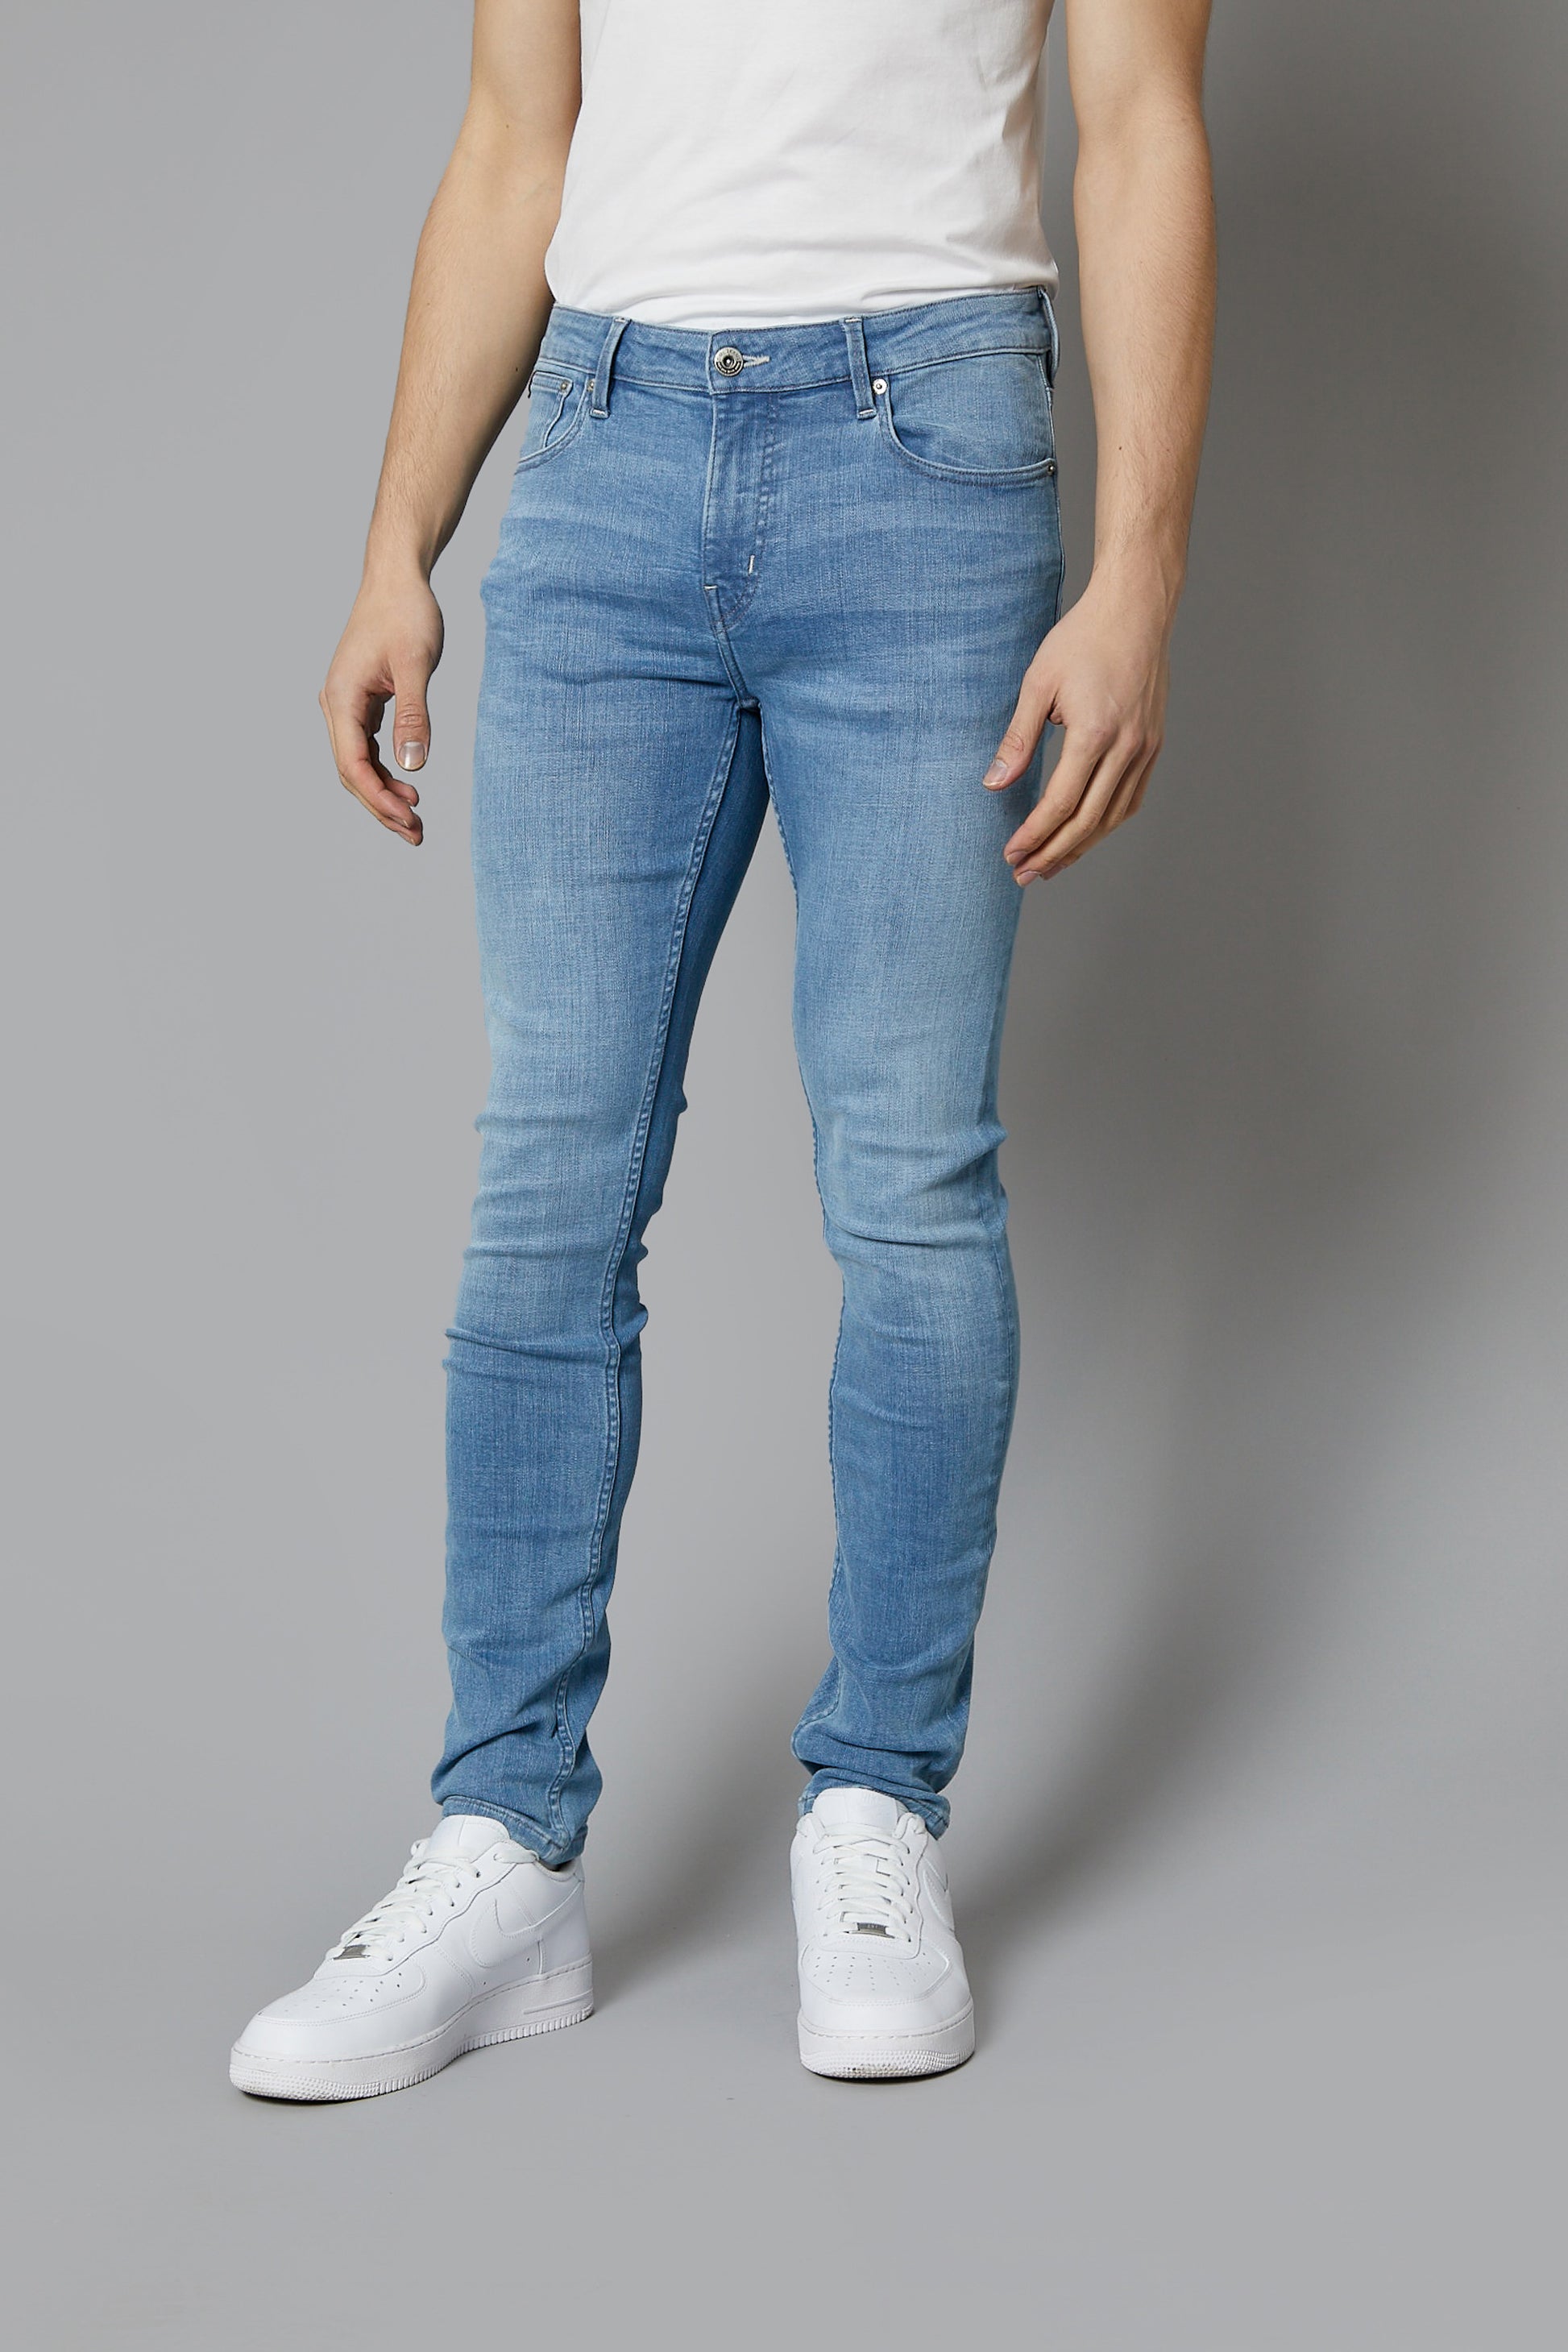 NEVADA Skinny Fit Jeans In Light Blue